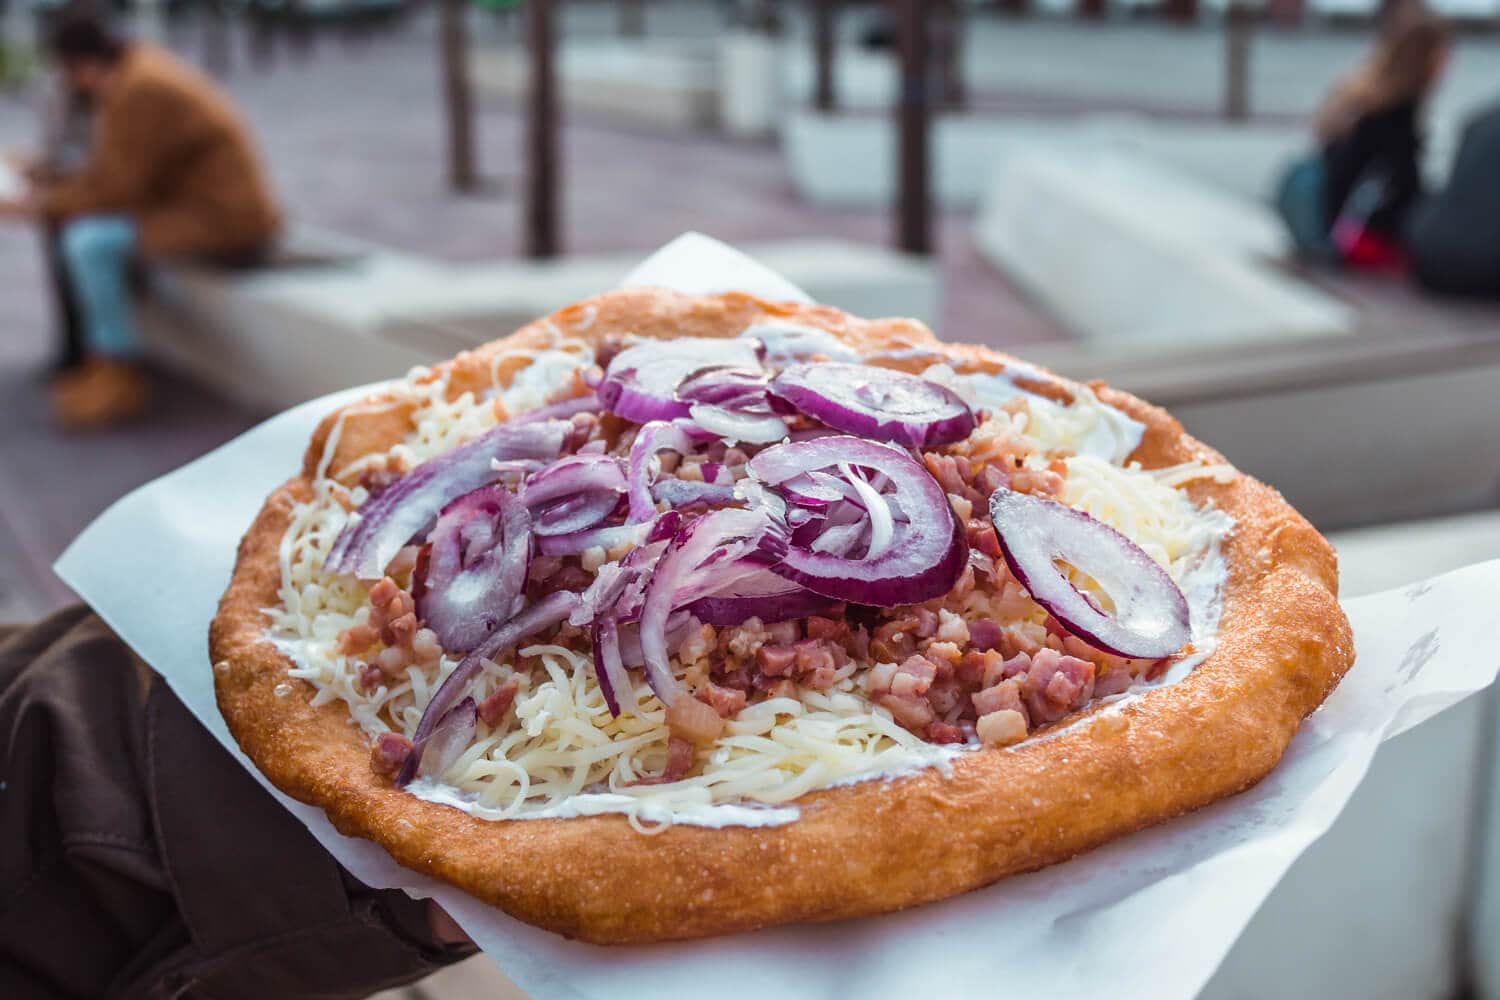 Eating Langos street food in Budapest - Fried bread topped with sour cream, cheese, red onion and bacon